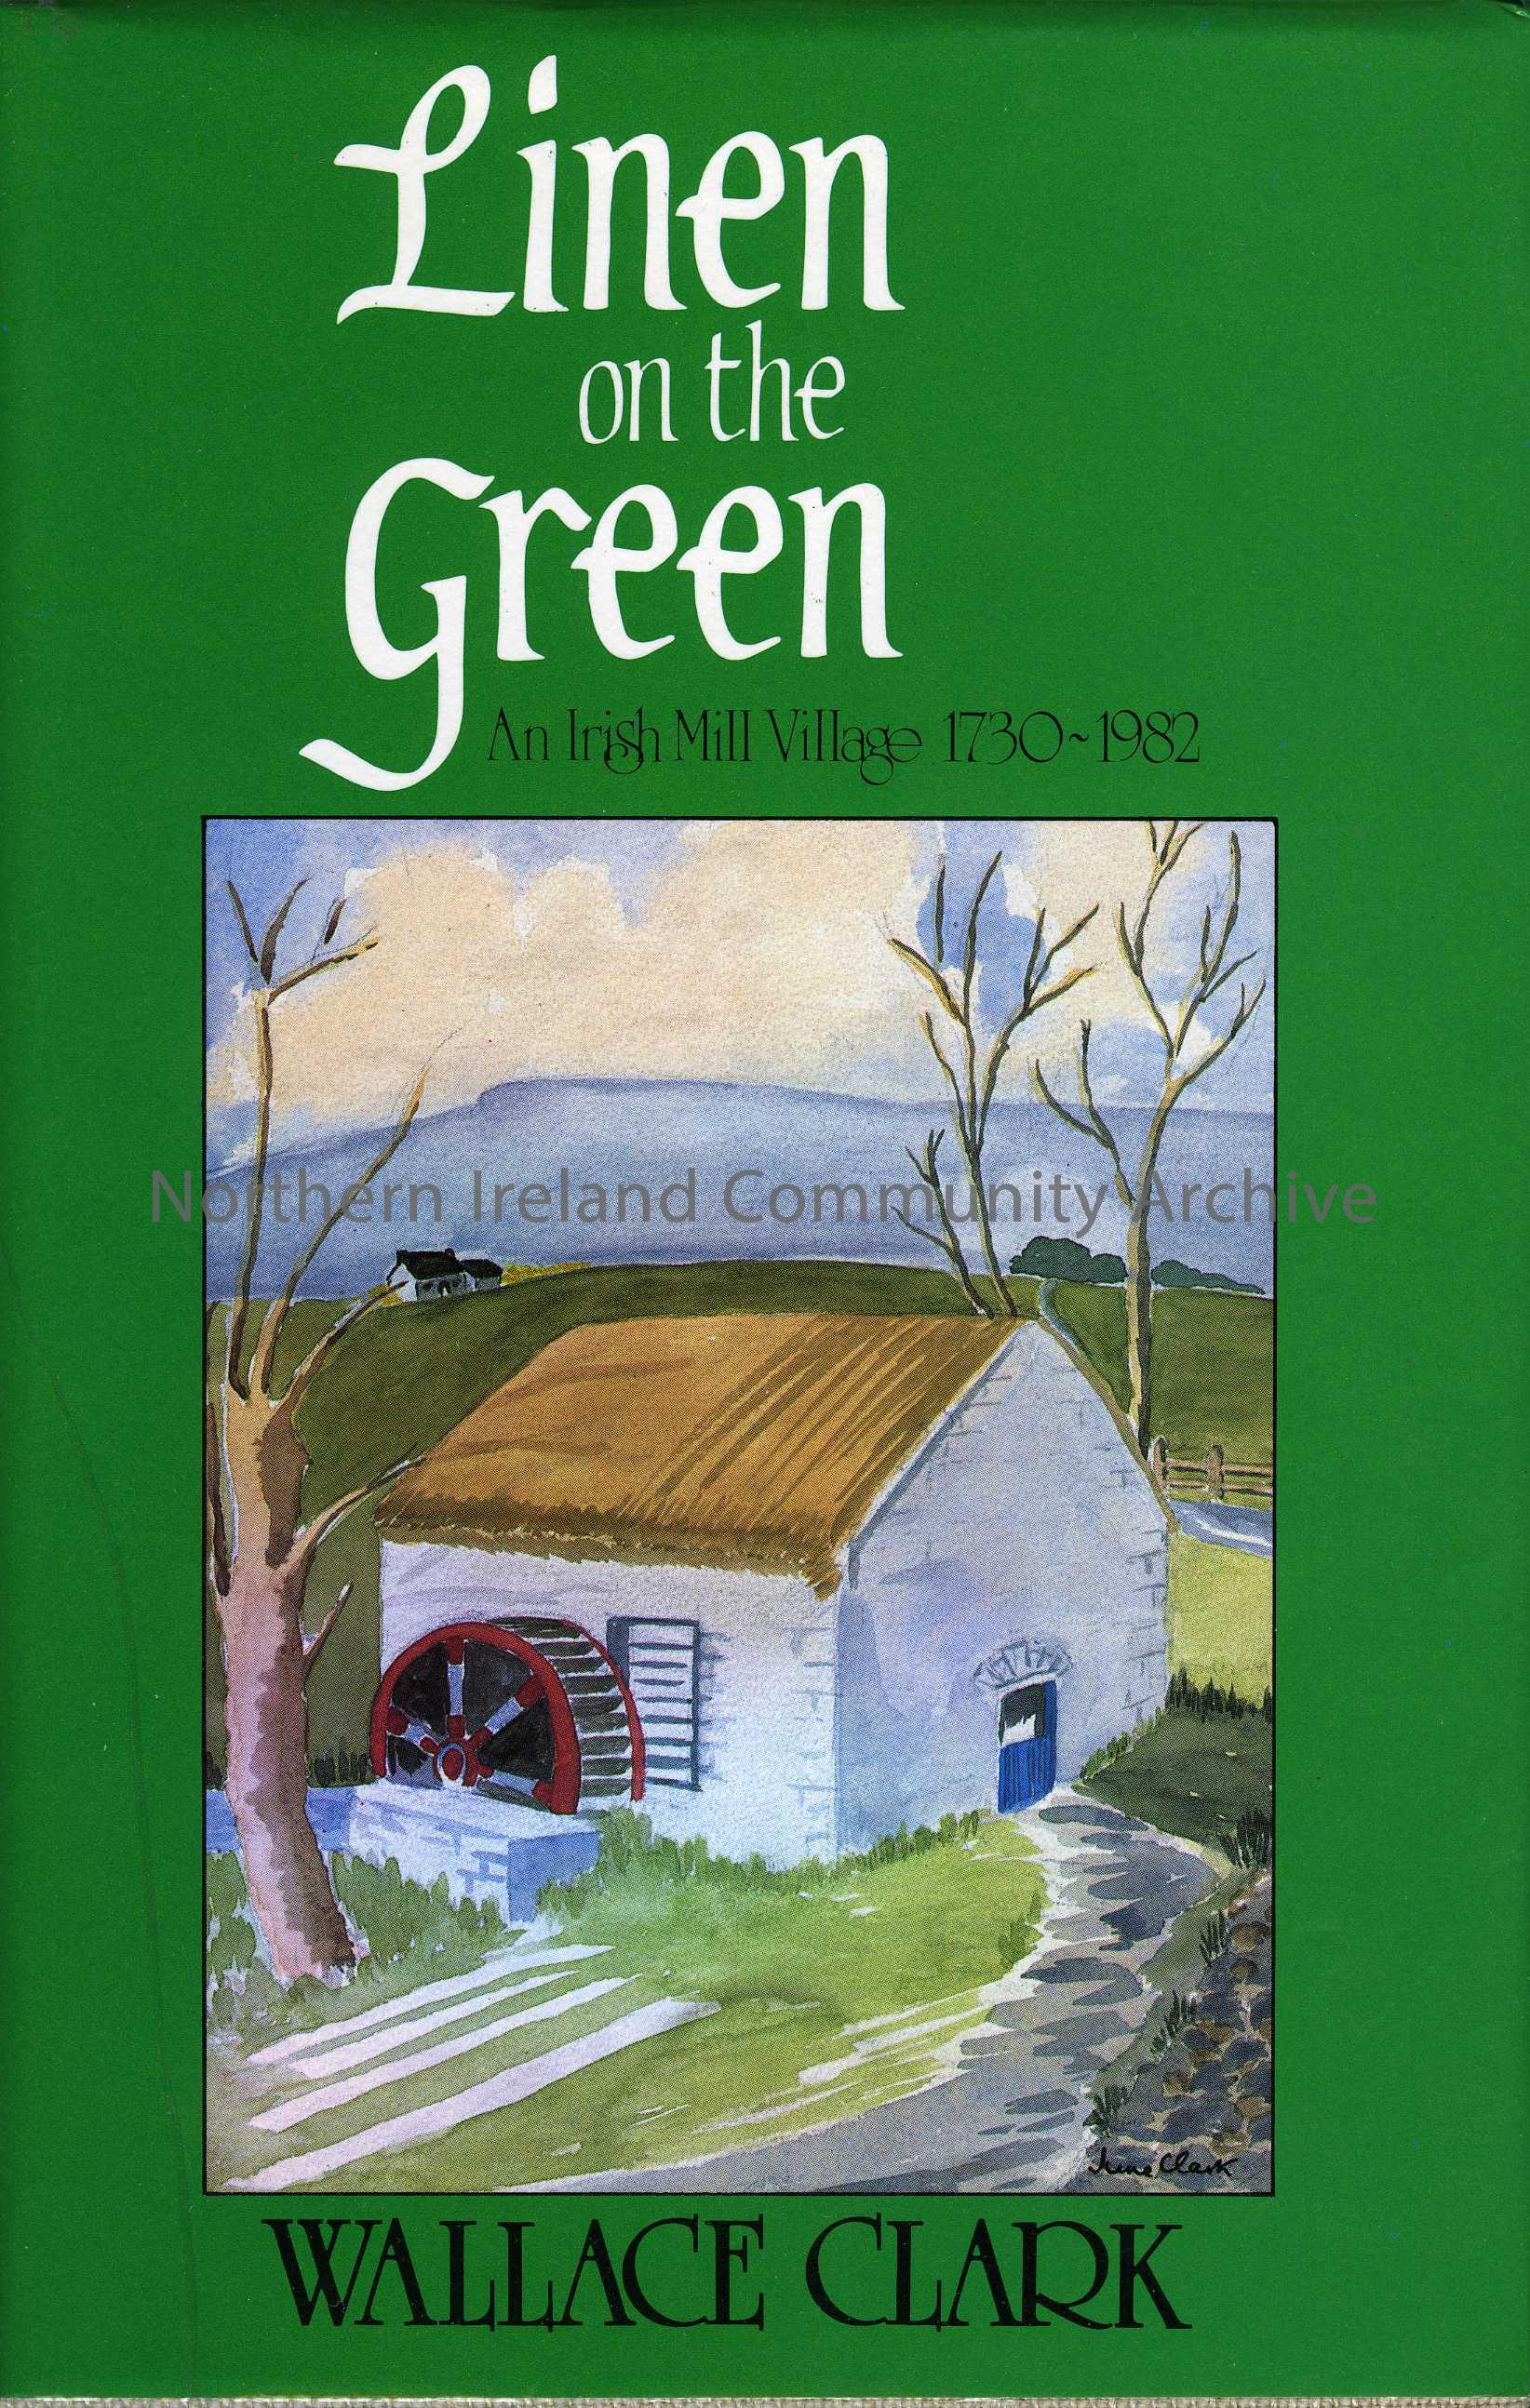 book titled, Linen on the Green, An Irish Mill Village 1730-1982. By Wallace Clark (5488)